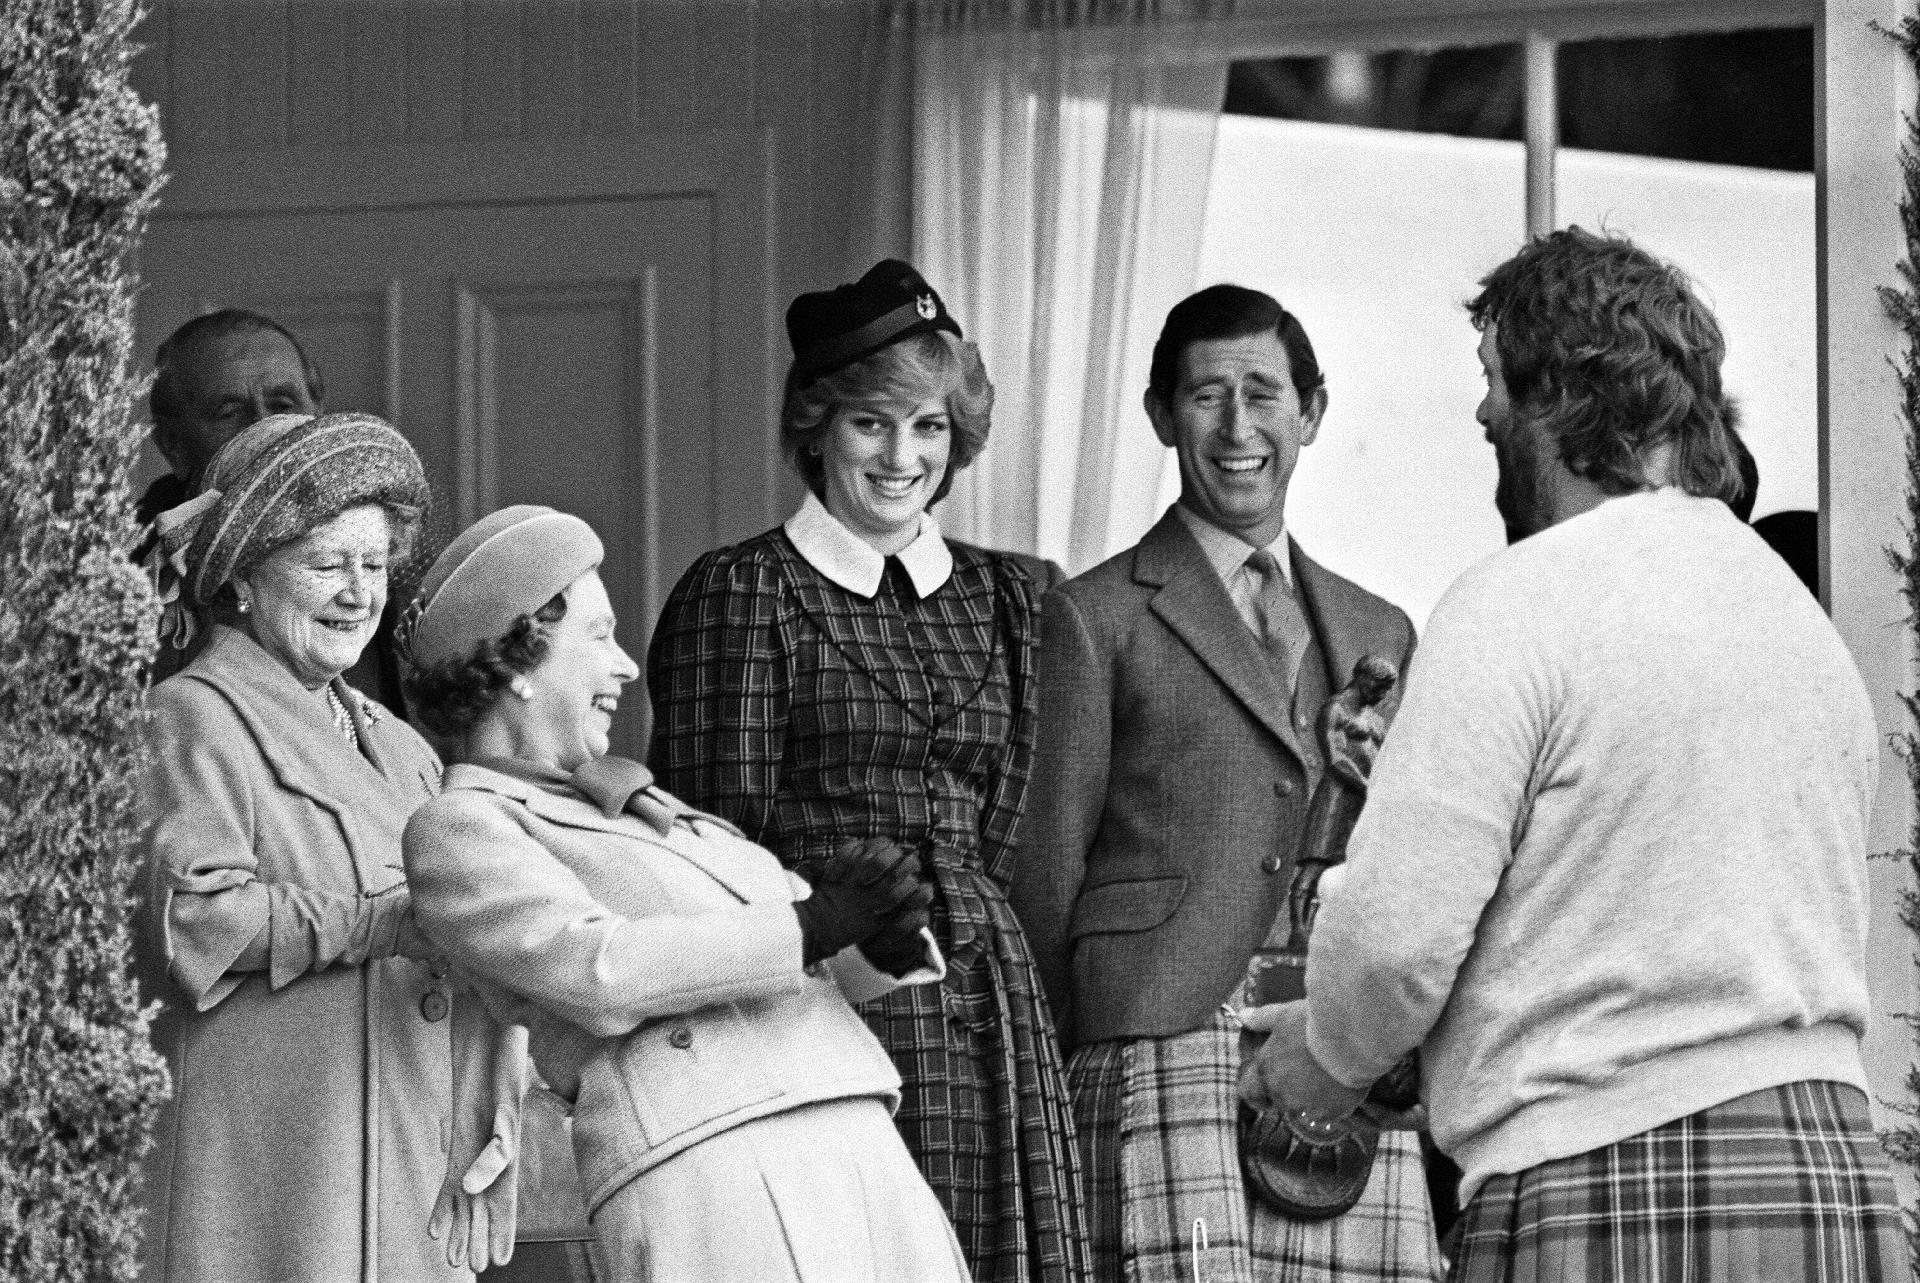 Queen Elizabeth II laughs with family at an event in Scotland in 1982. - Getty Images